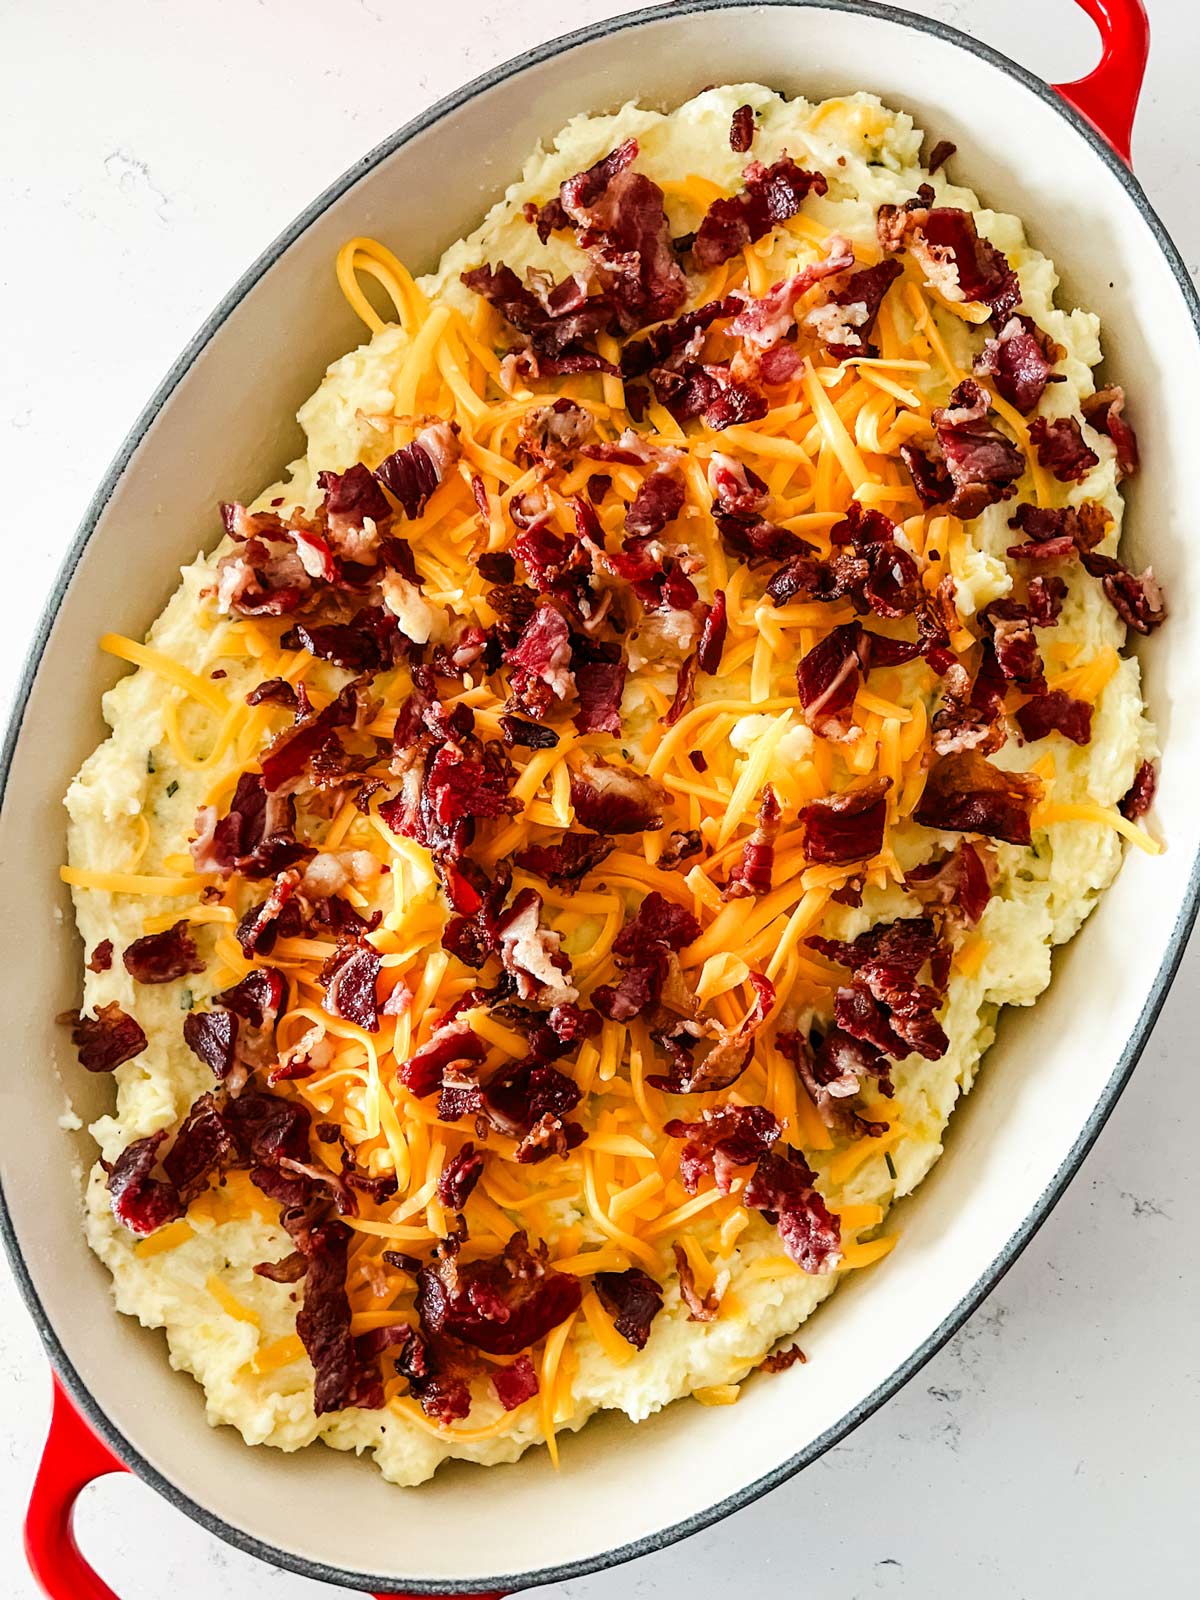 Mashed potatoes in a casserole dish with cheese and bacon on top.